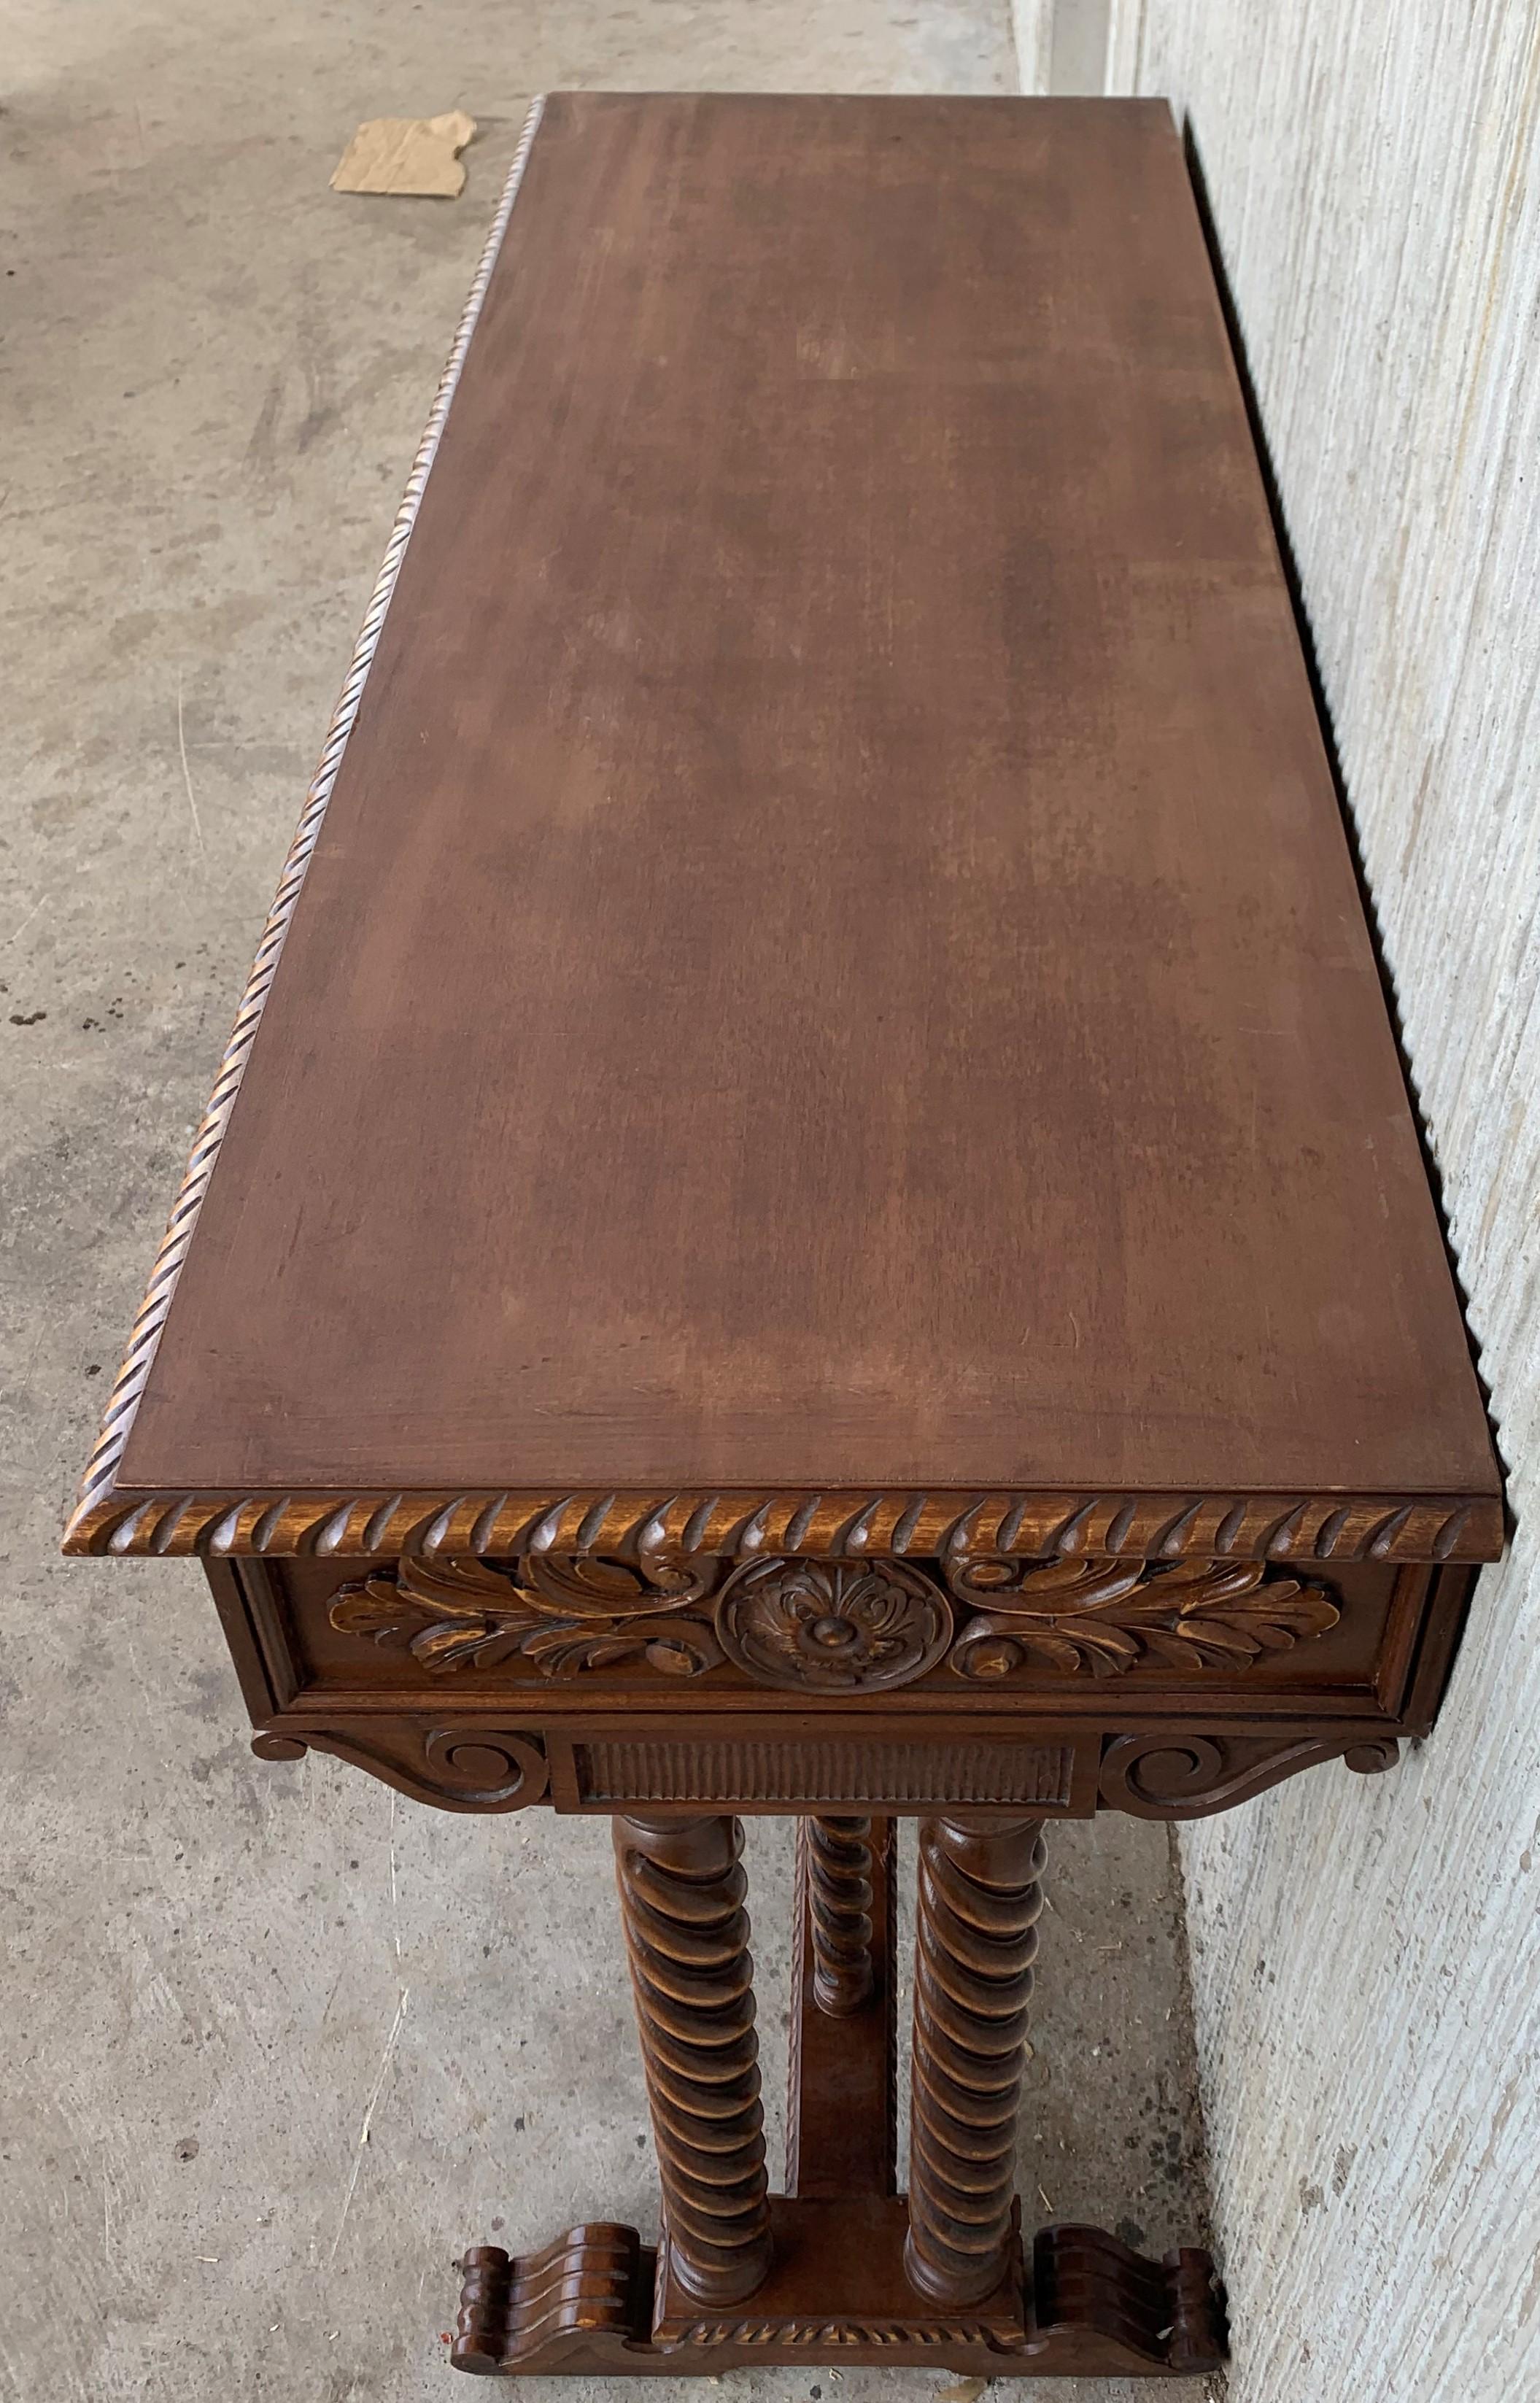 Walnut Spanish Tuscan Console Table with Three Drawers and Solomonic Columns Legs